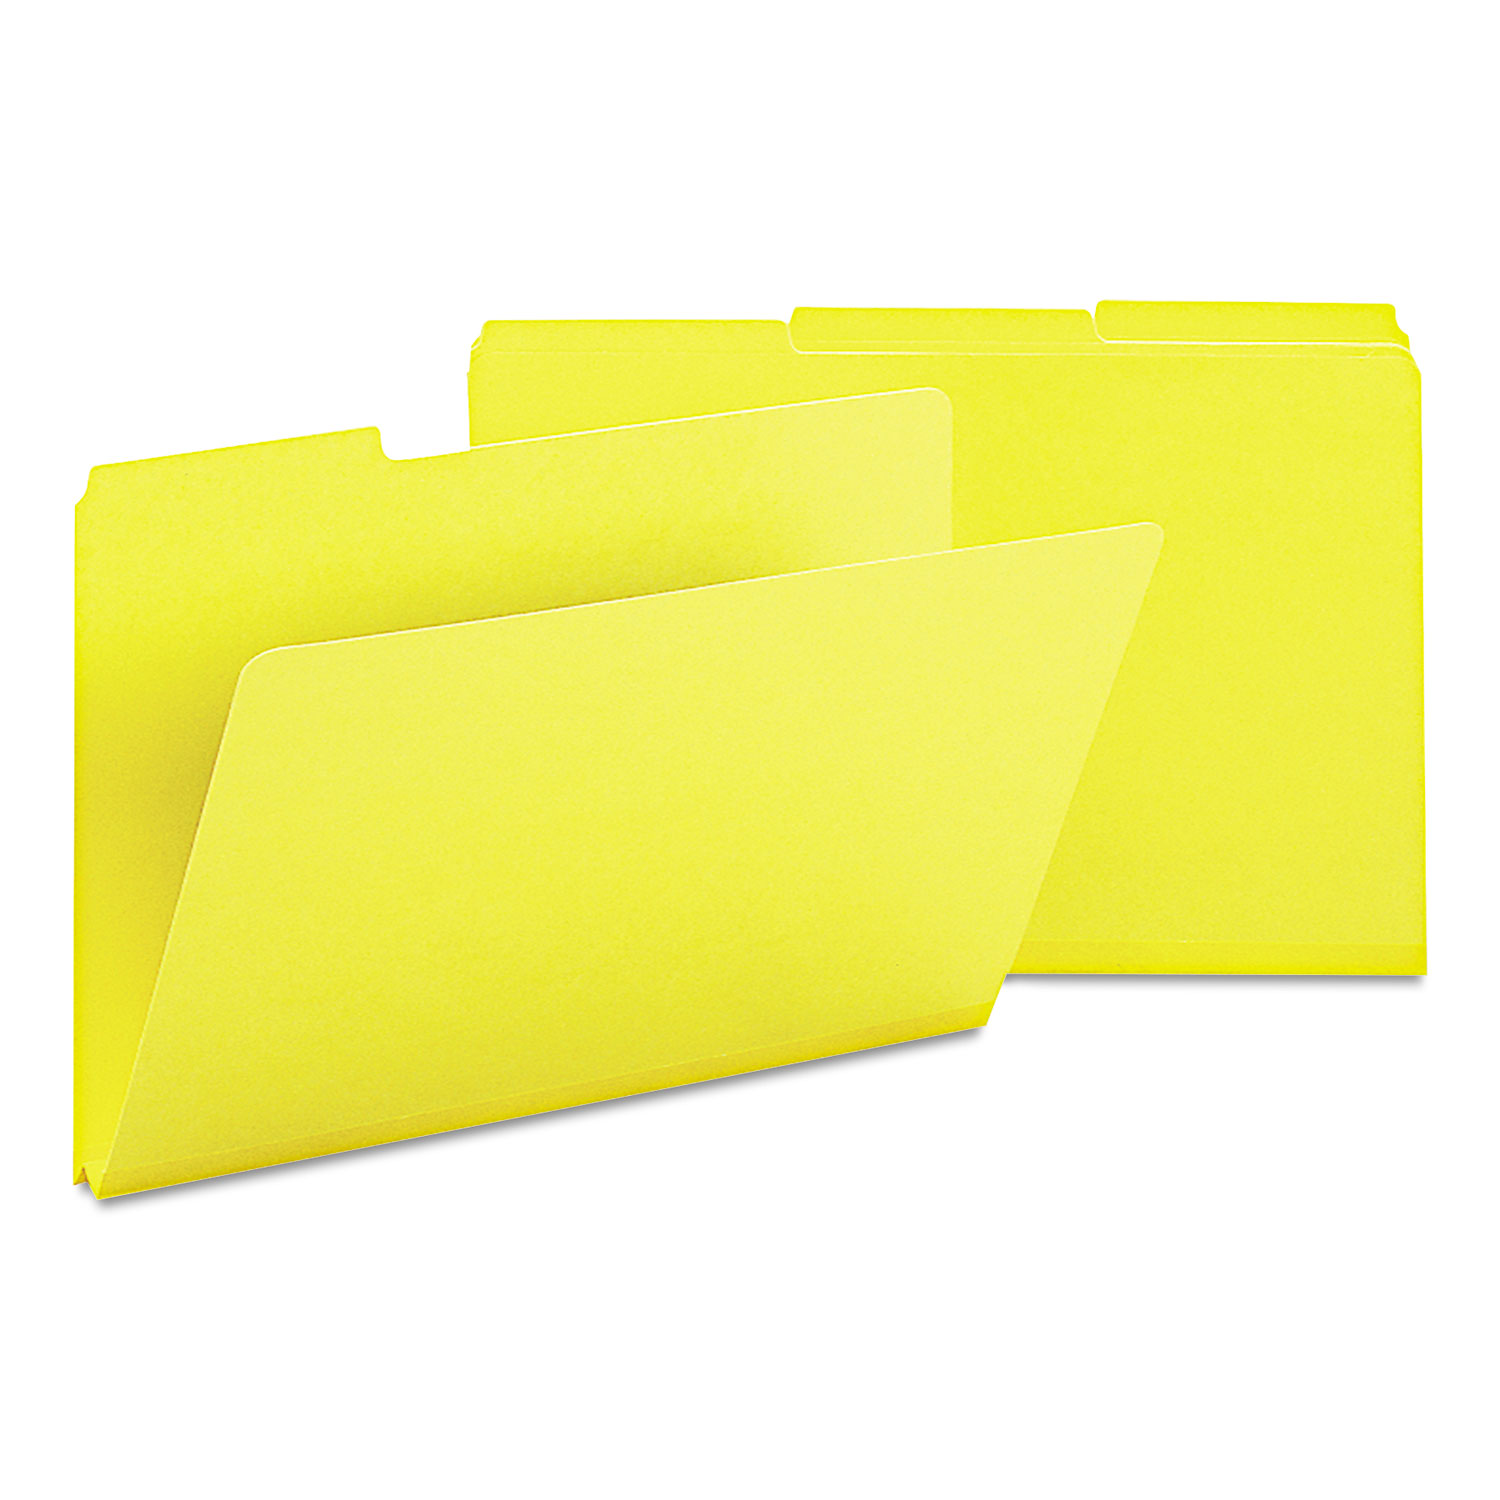  Smead 22562 Expanding Recycled Heavy Pressboard Folders, 1/3-Cut Tabs, 1 Expansion, Legal Size, Yellow, 25/Box (SMD22562) 